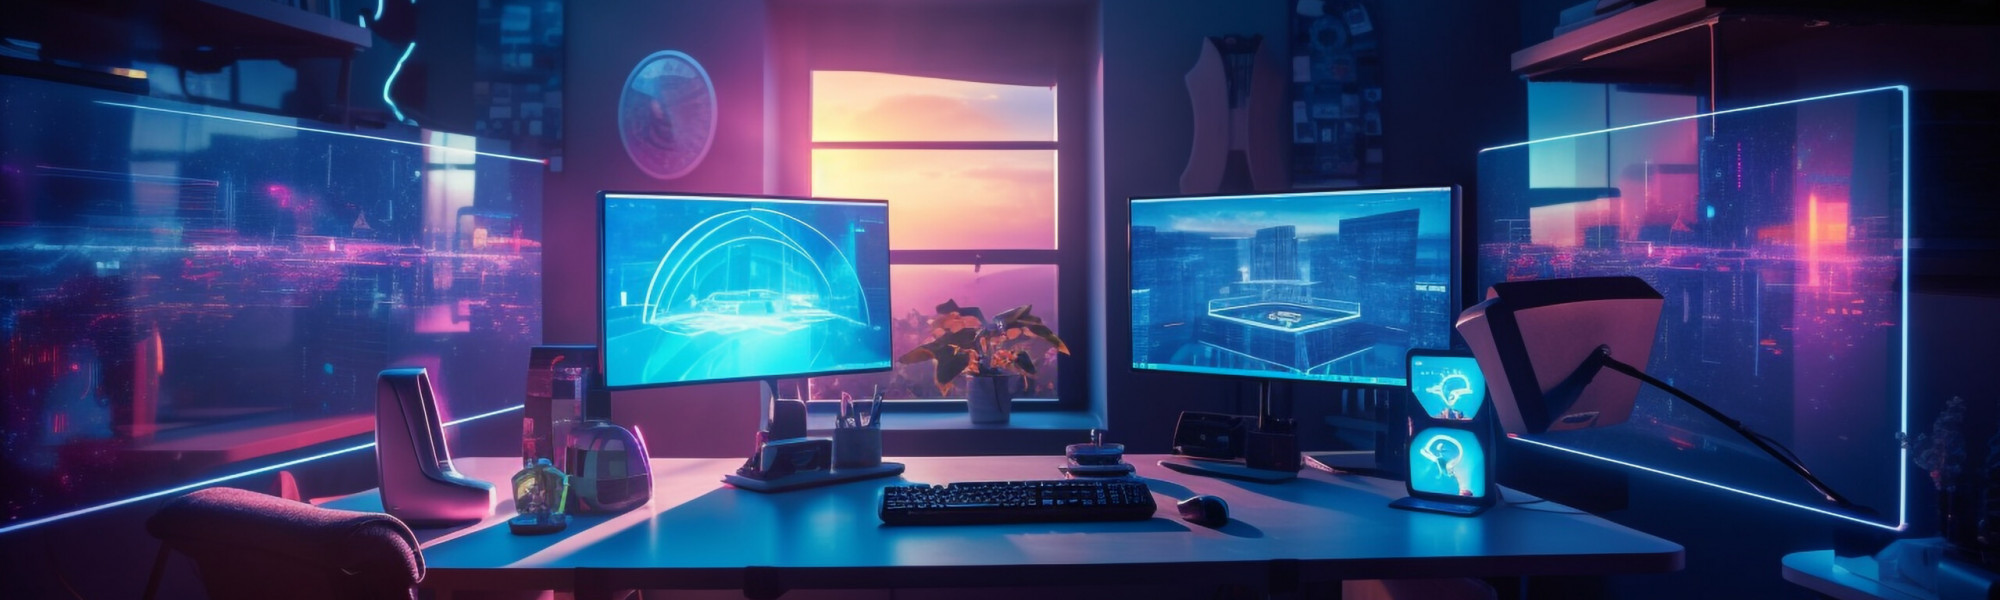 Futuristic computer lab with bright blue lighting generated by artificial intelligence